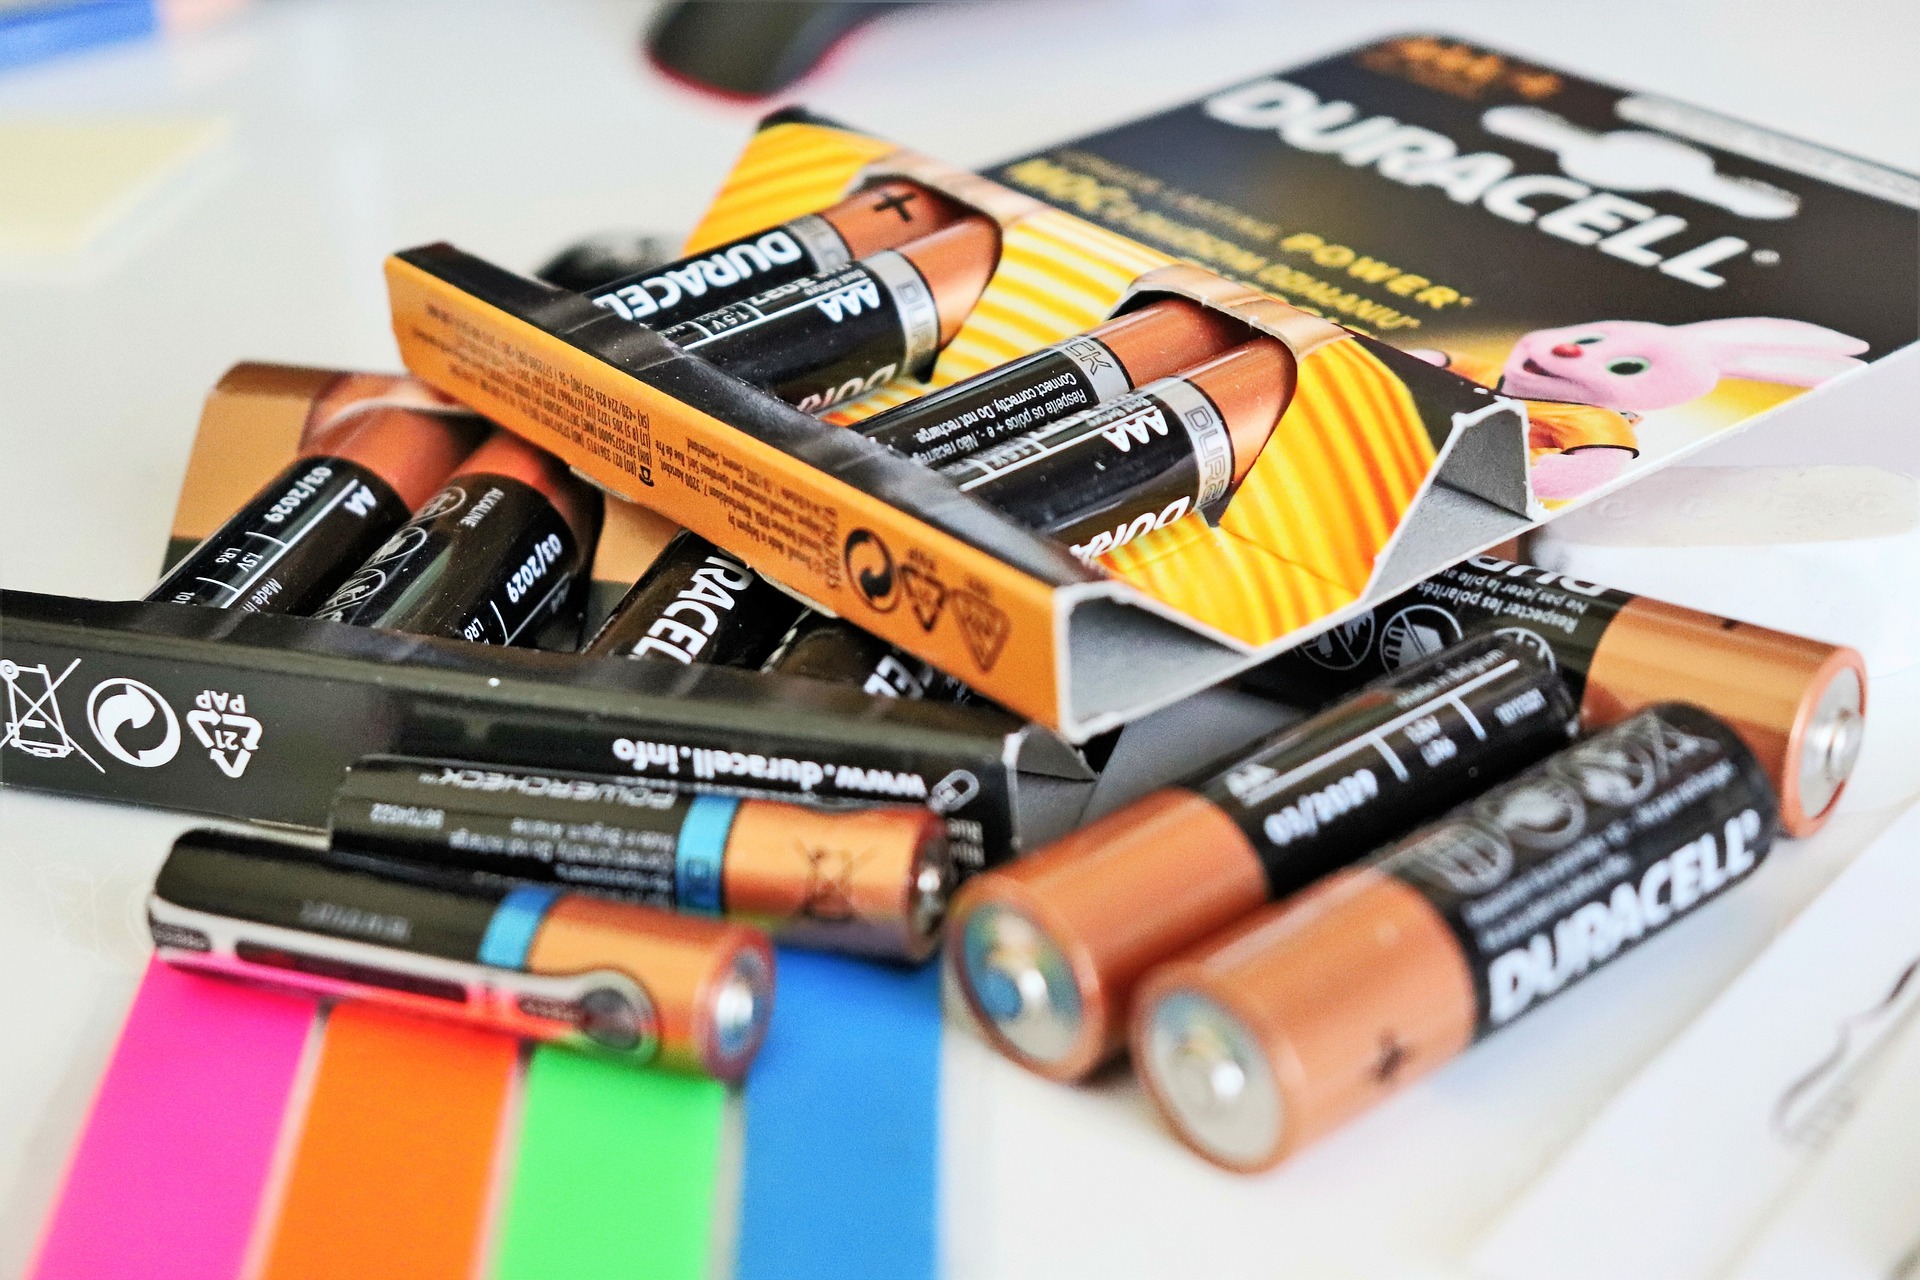 Piles et batteries AA - AAA - Large gamme